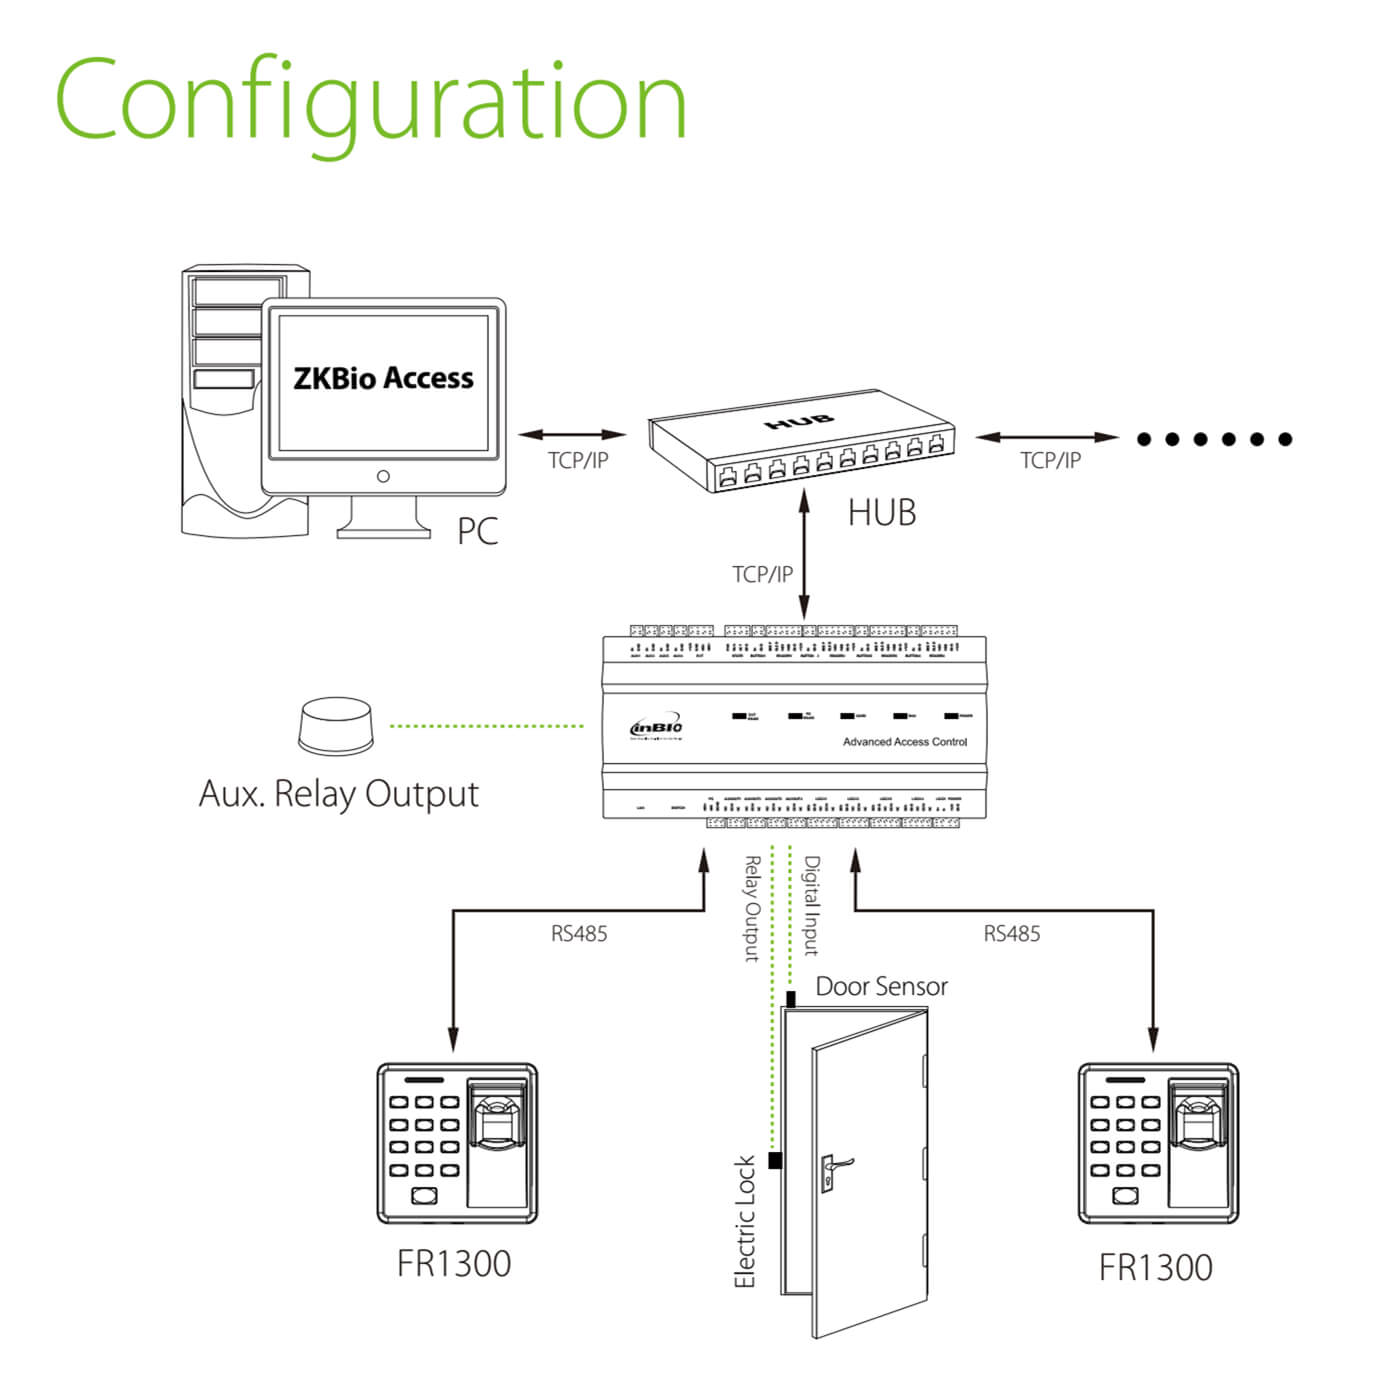 FR1300 Connecting to FP Access Control